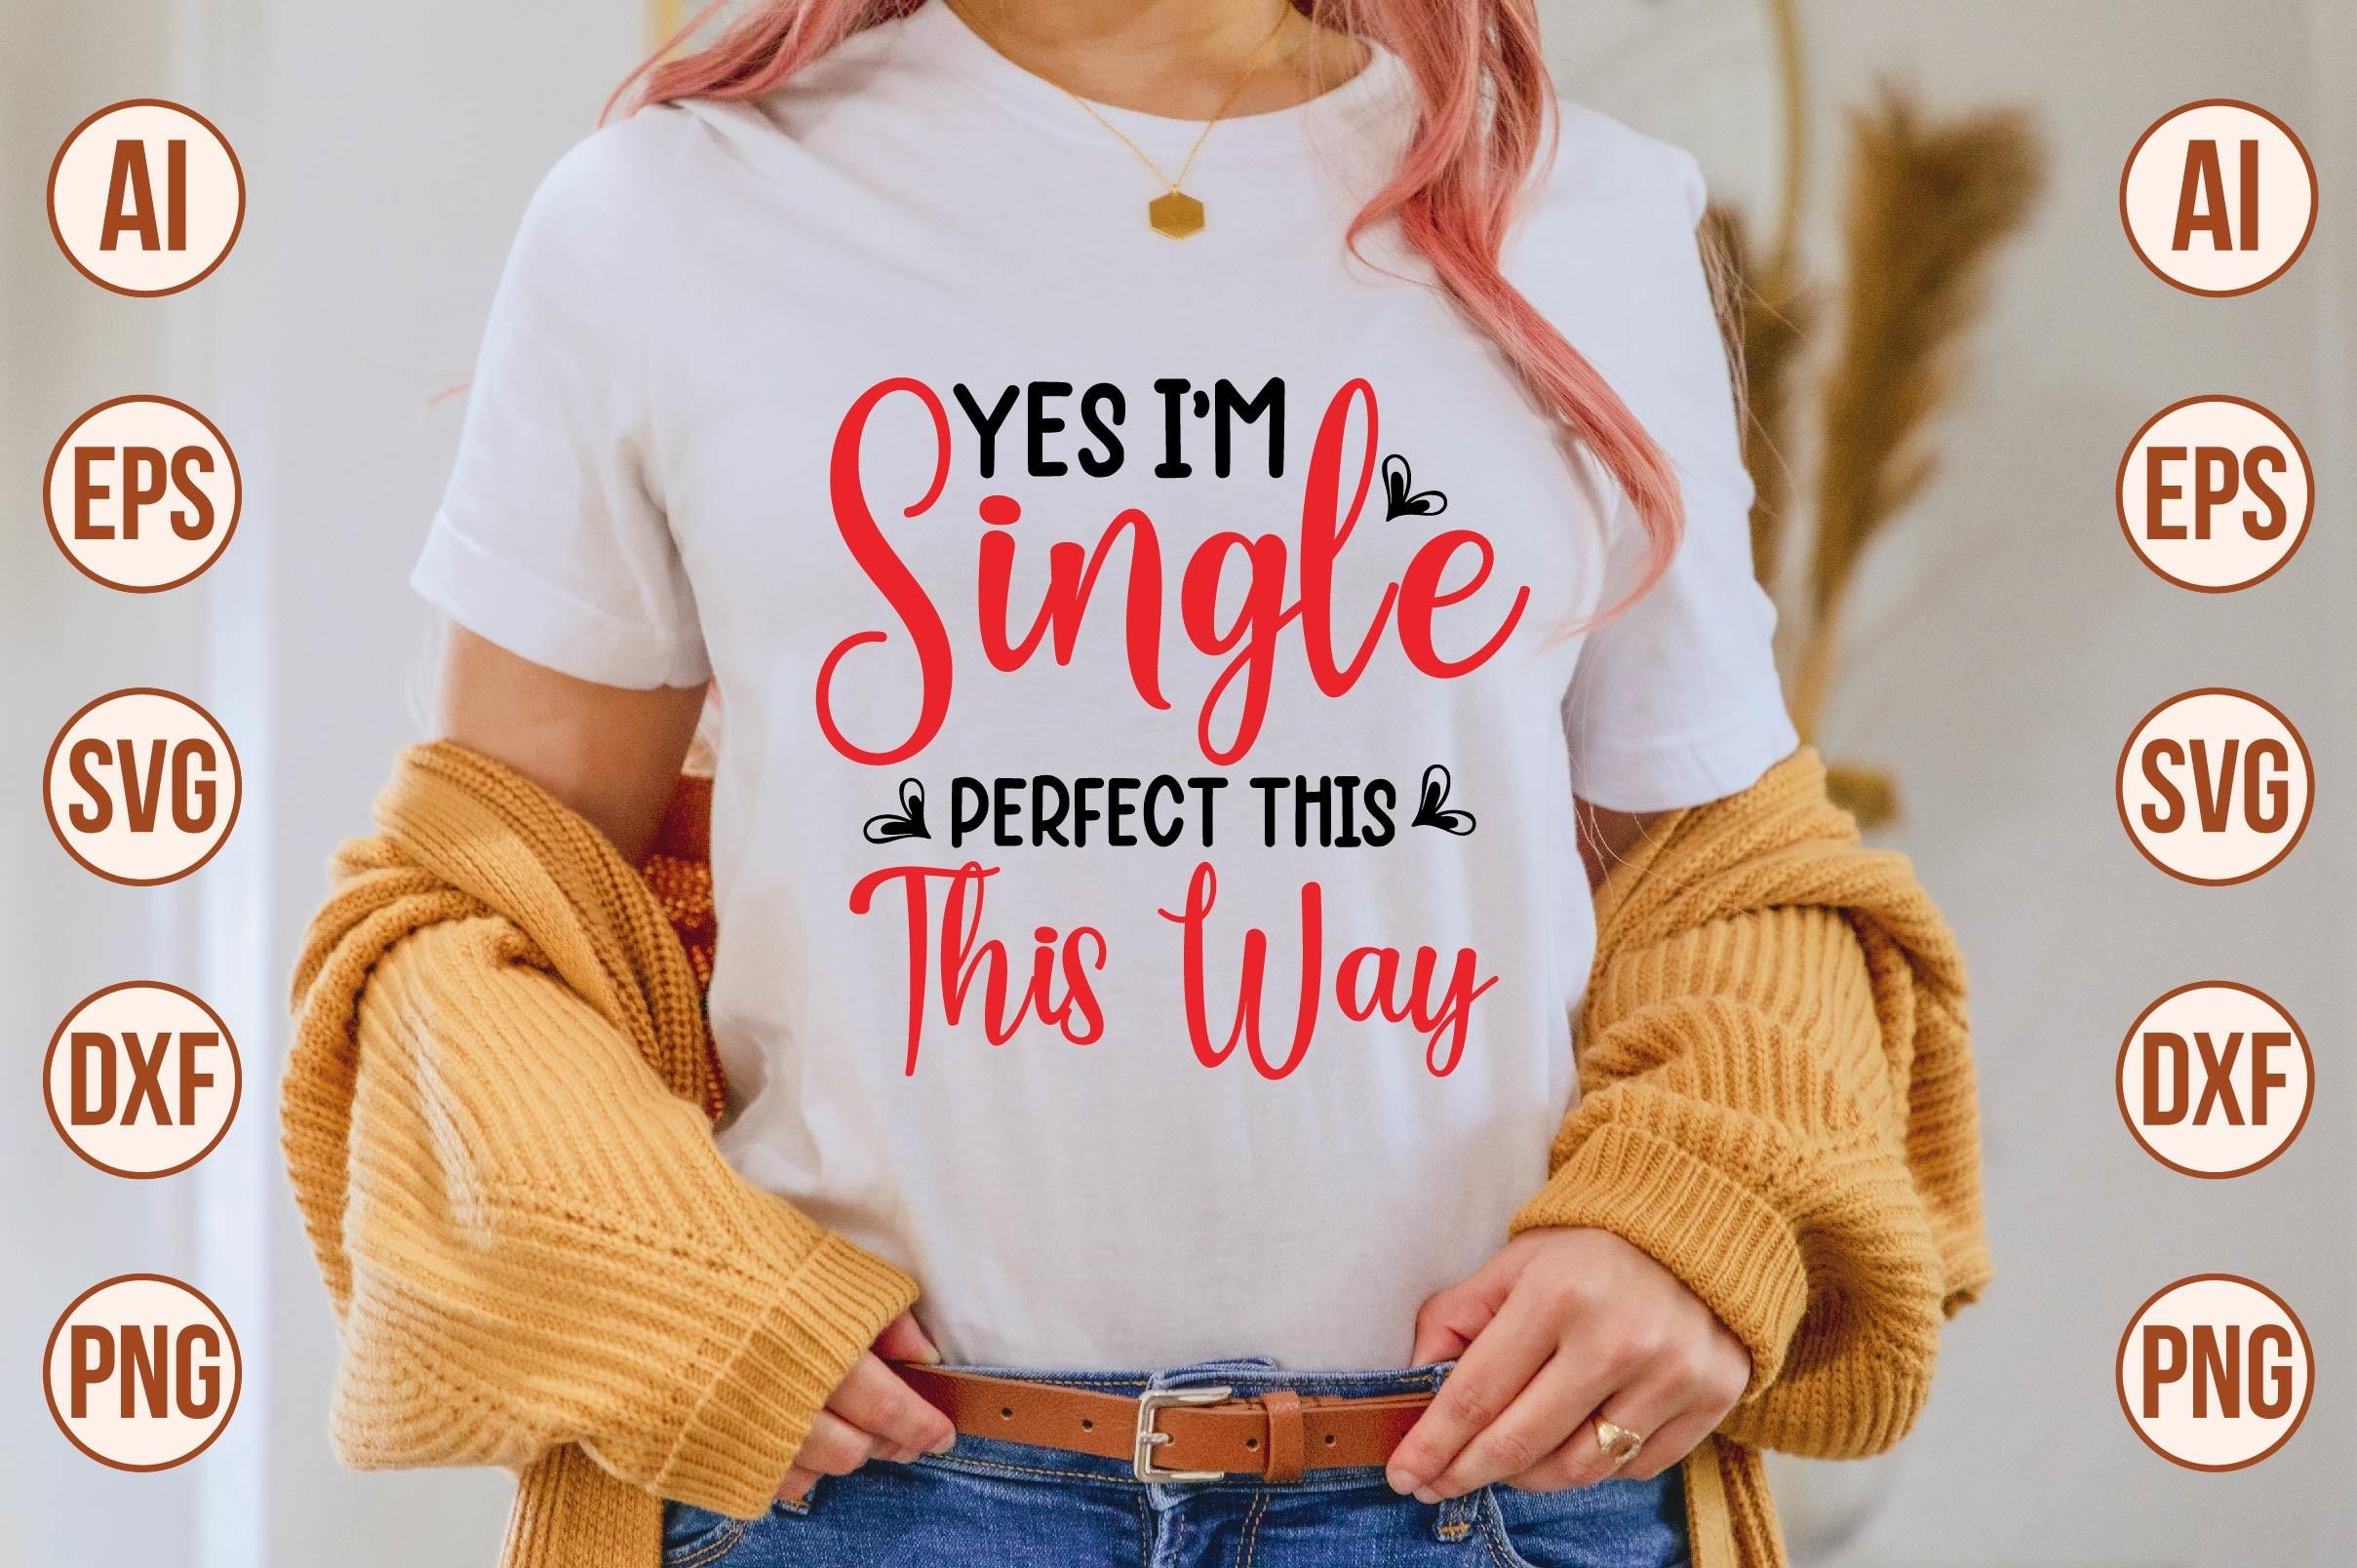 Yes I'm Single and Perfect This Way